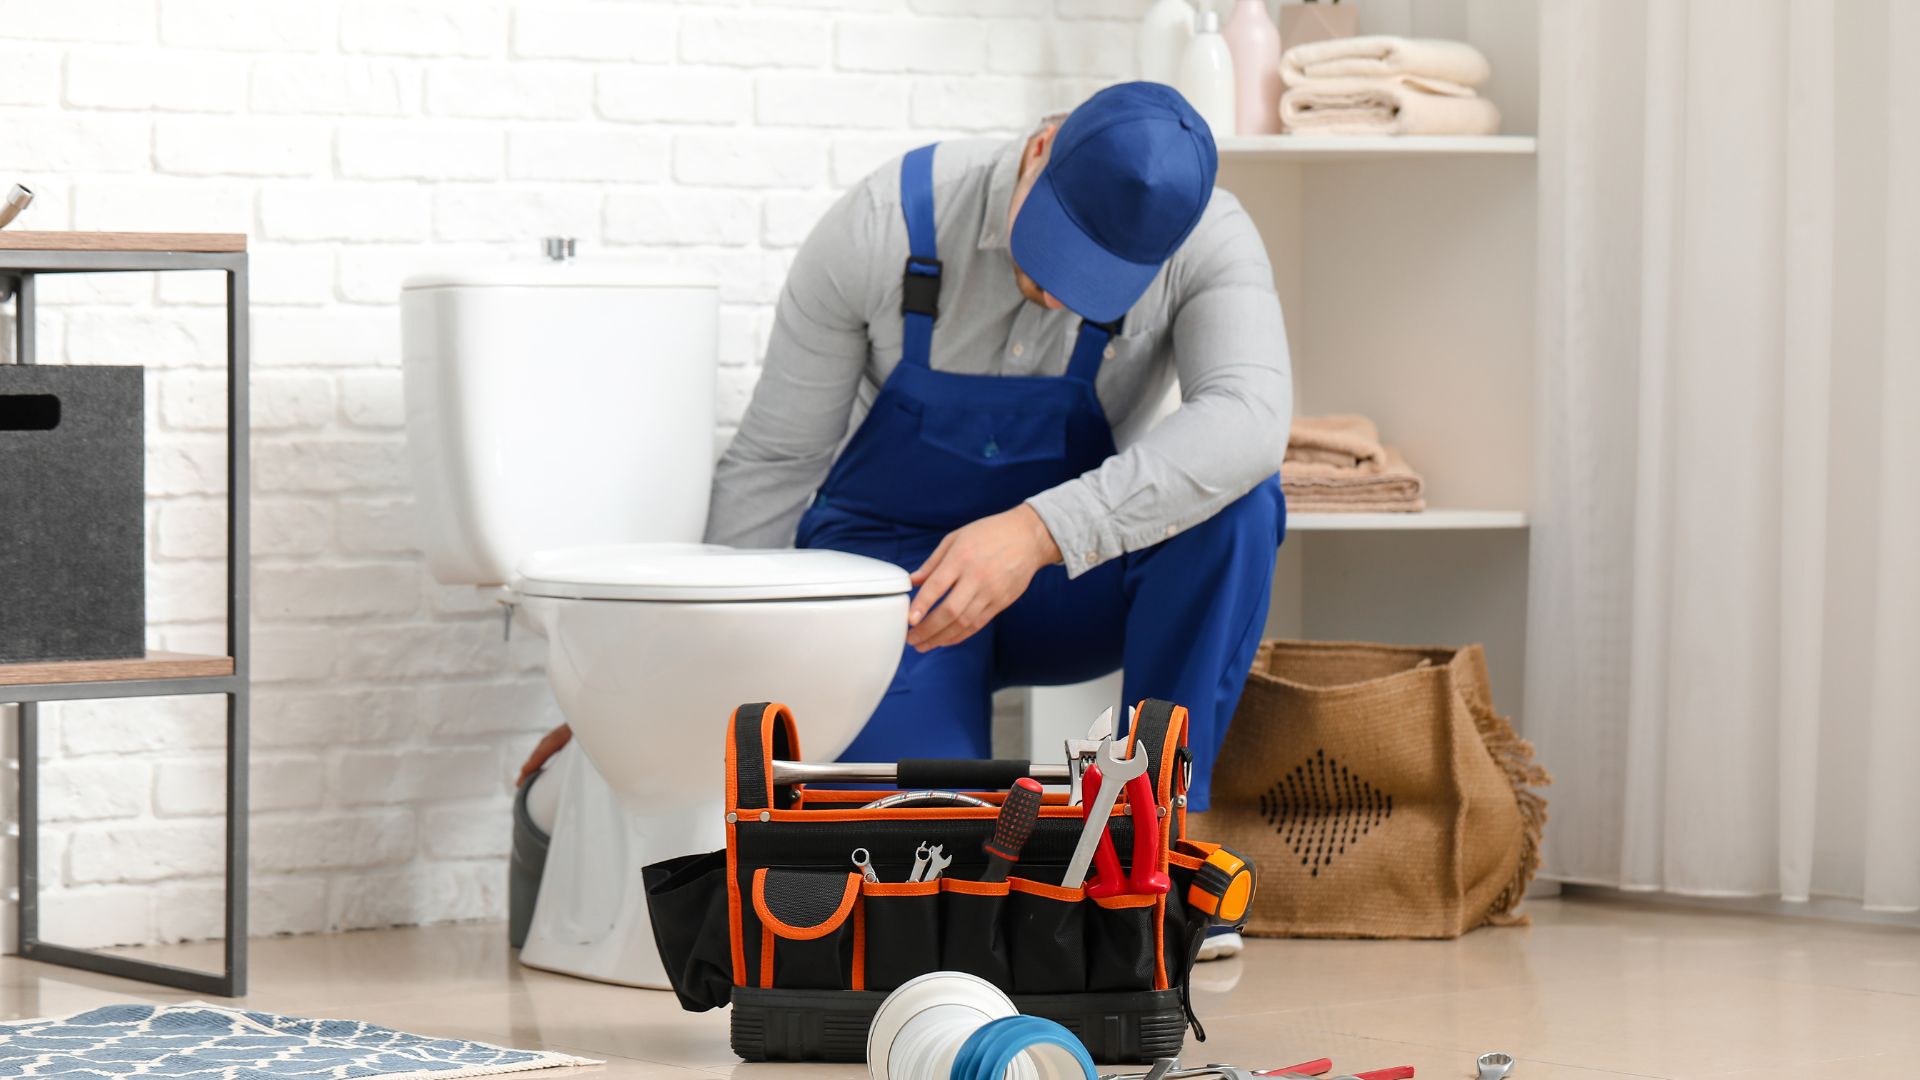 Reach out to CAN Plumbing and Drainage for all your toilet requirements, expertly handled by our plumbers.